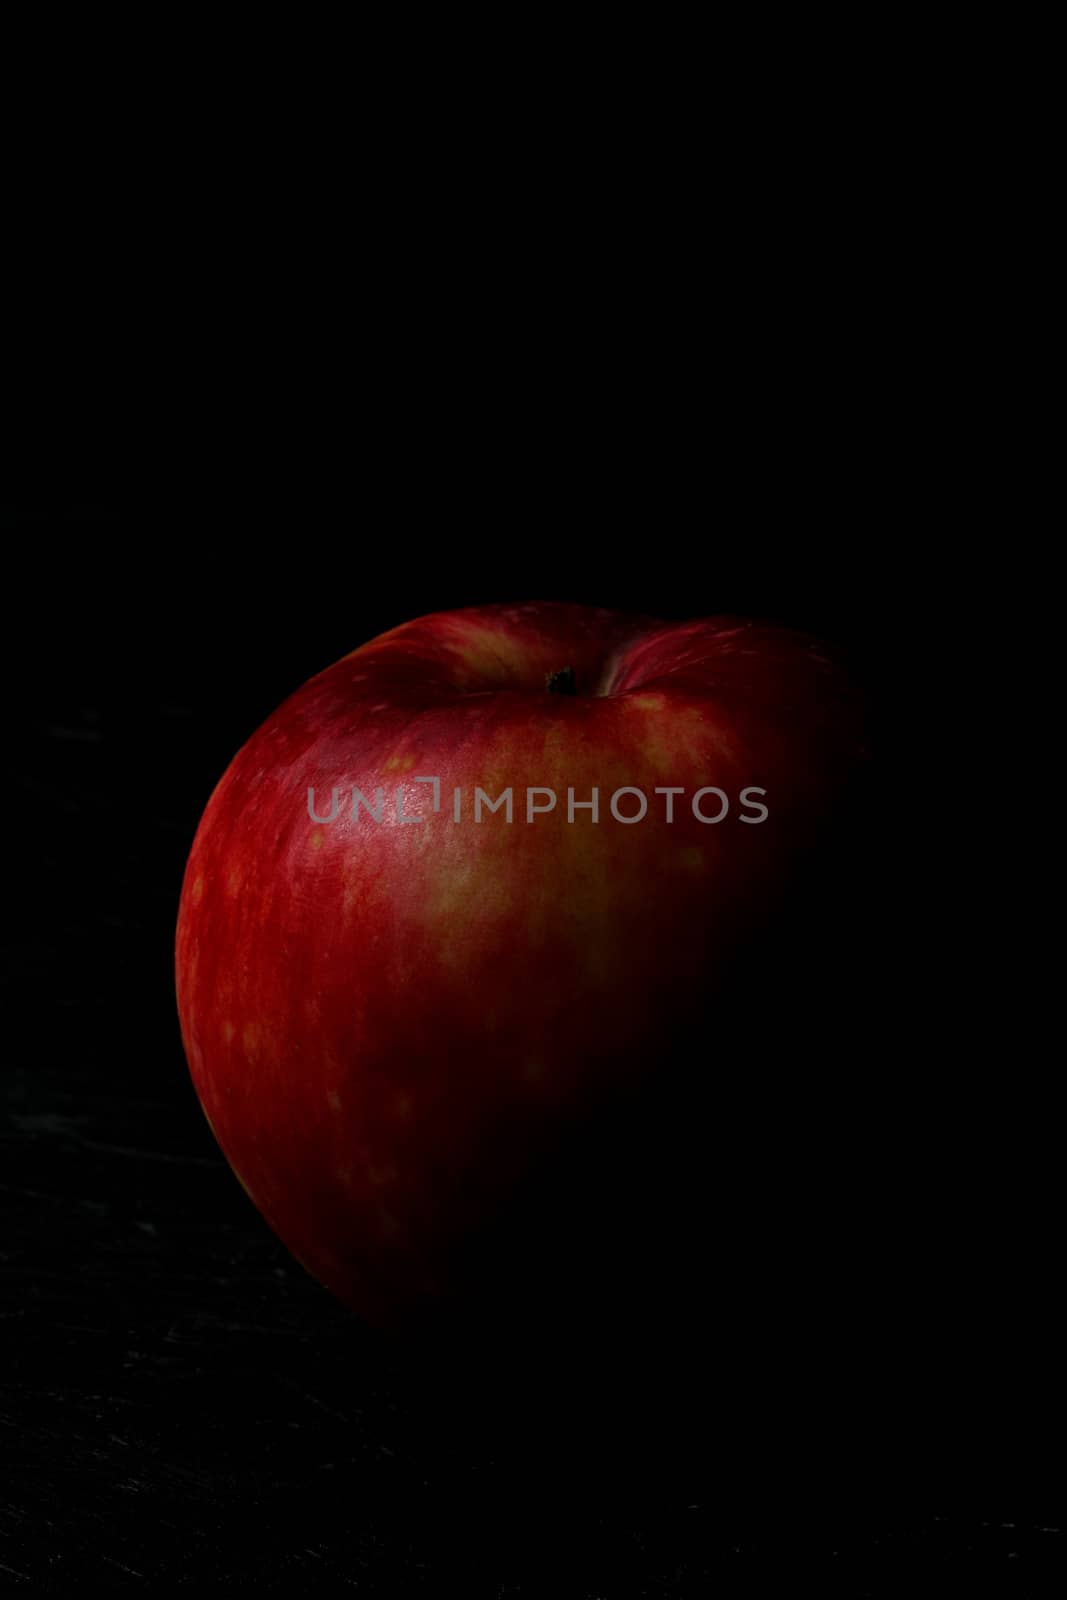 Red apple isolated on black wooden background